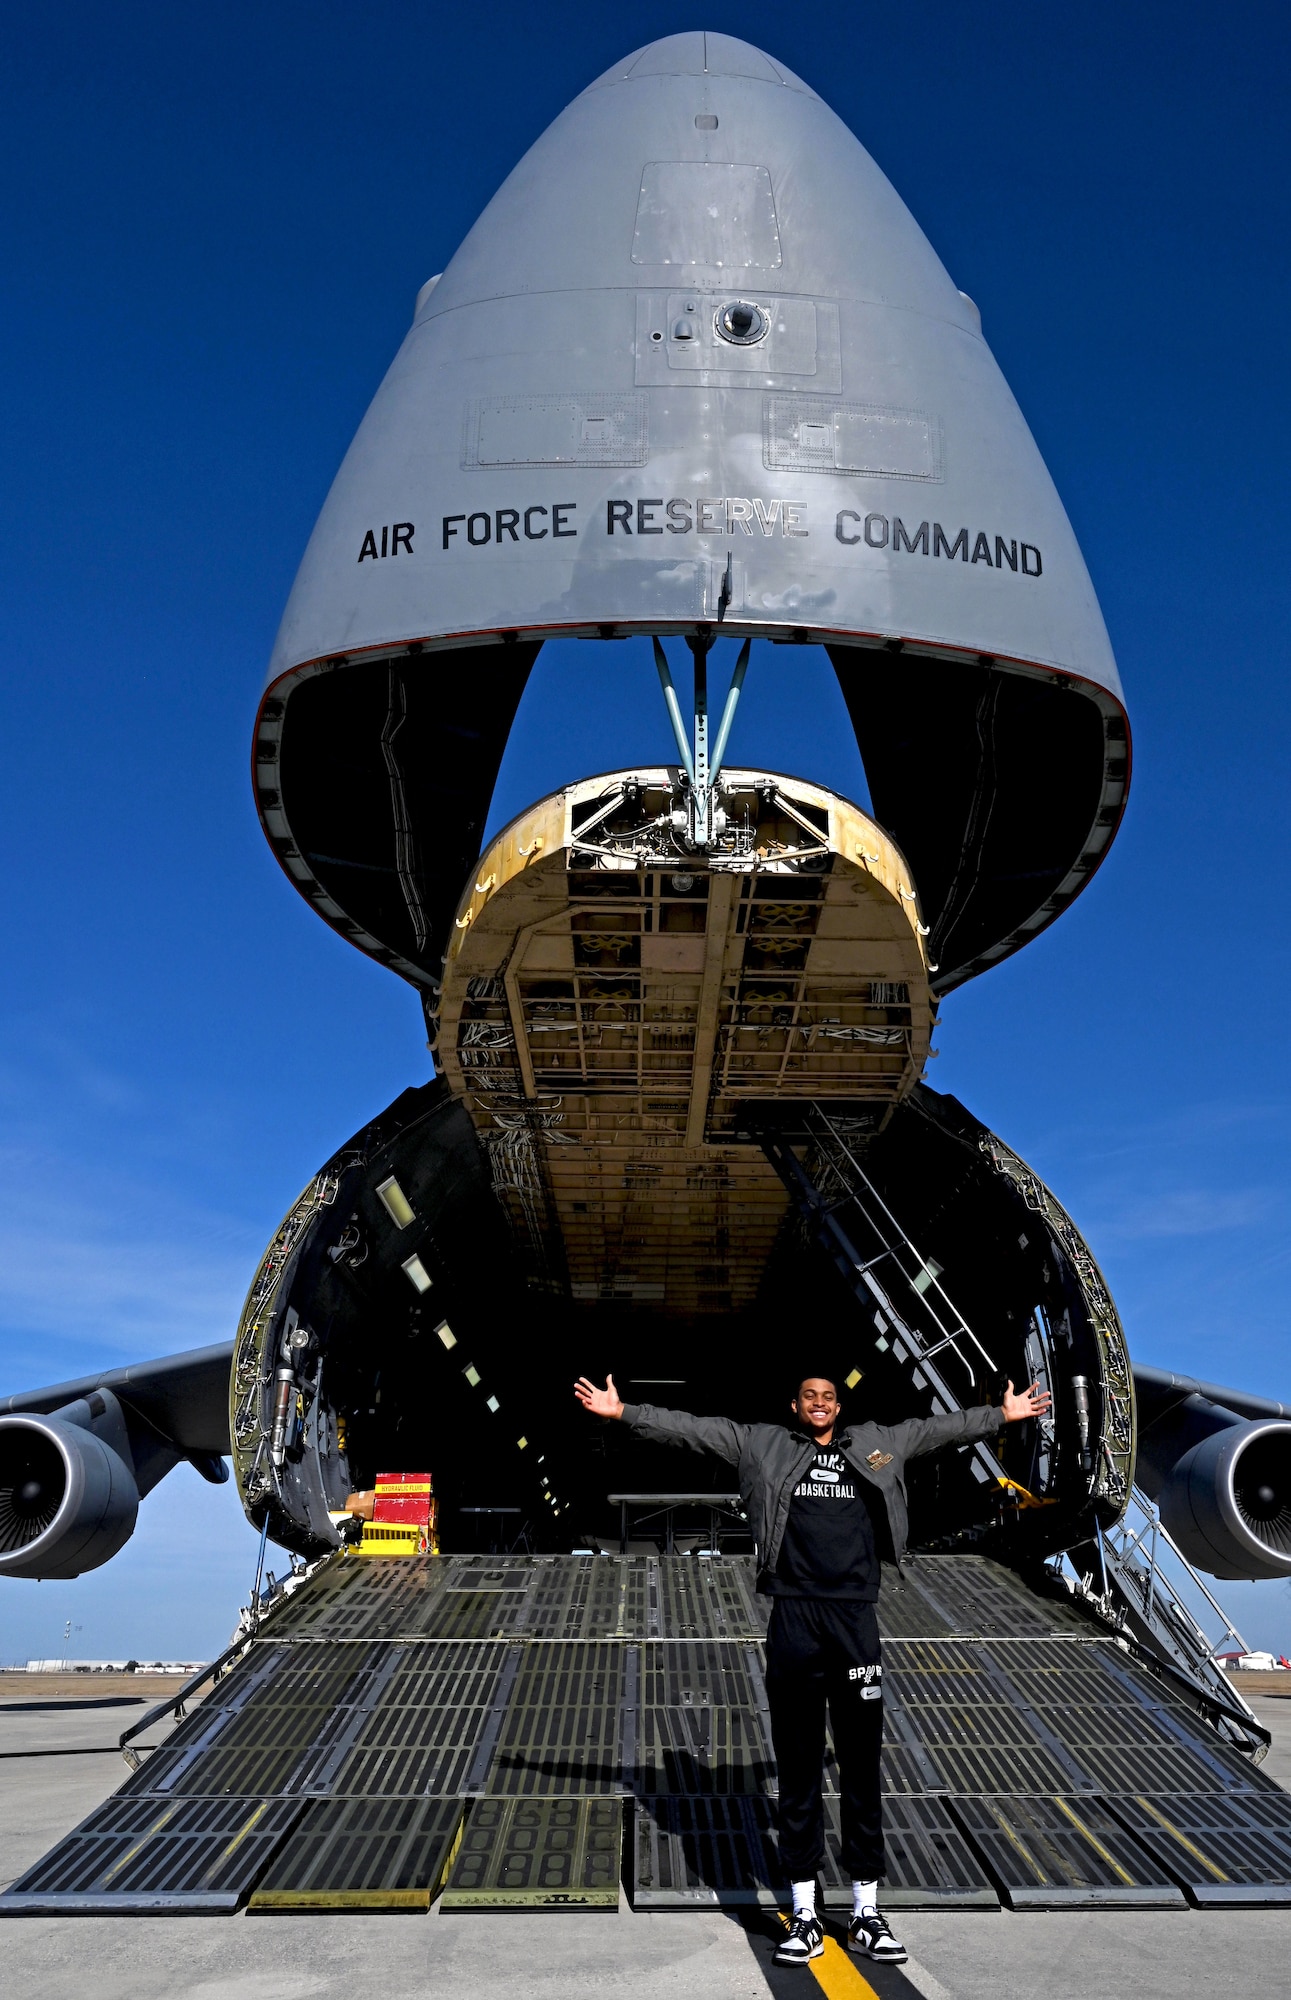 Keldon Johnson, a San Antonio Spurs basketball player, stands for a photograph with a C-5M Super Galaxy aircraft during his visit to the 433rd Airlift Wing at Joint Base San Antonio-Lackland, Texas, March 2, 2022. (U.S. Air Force photo by Samantha Mathison)